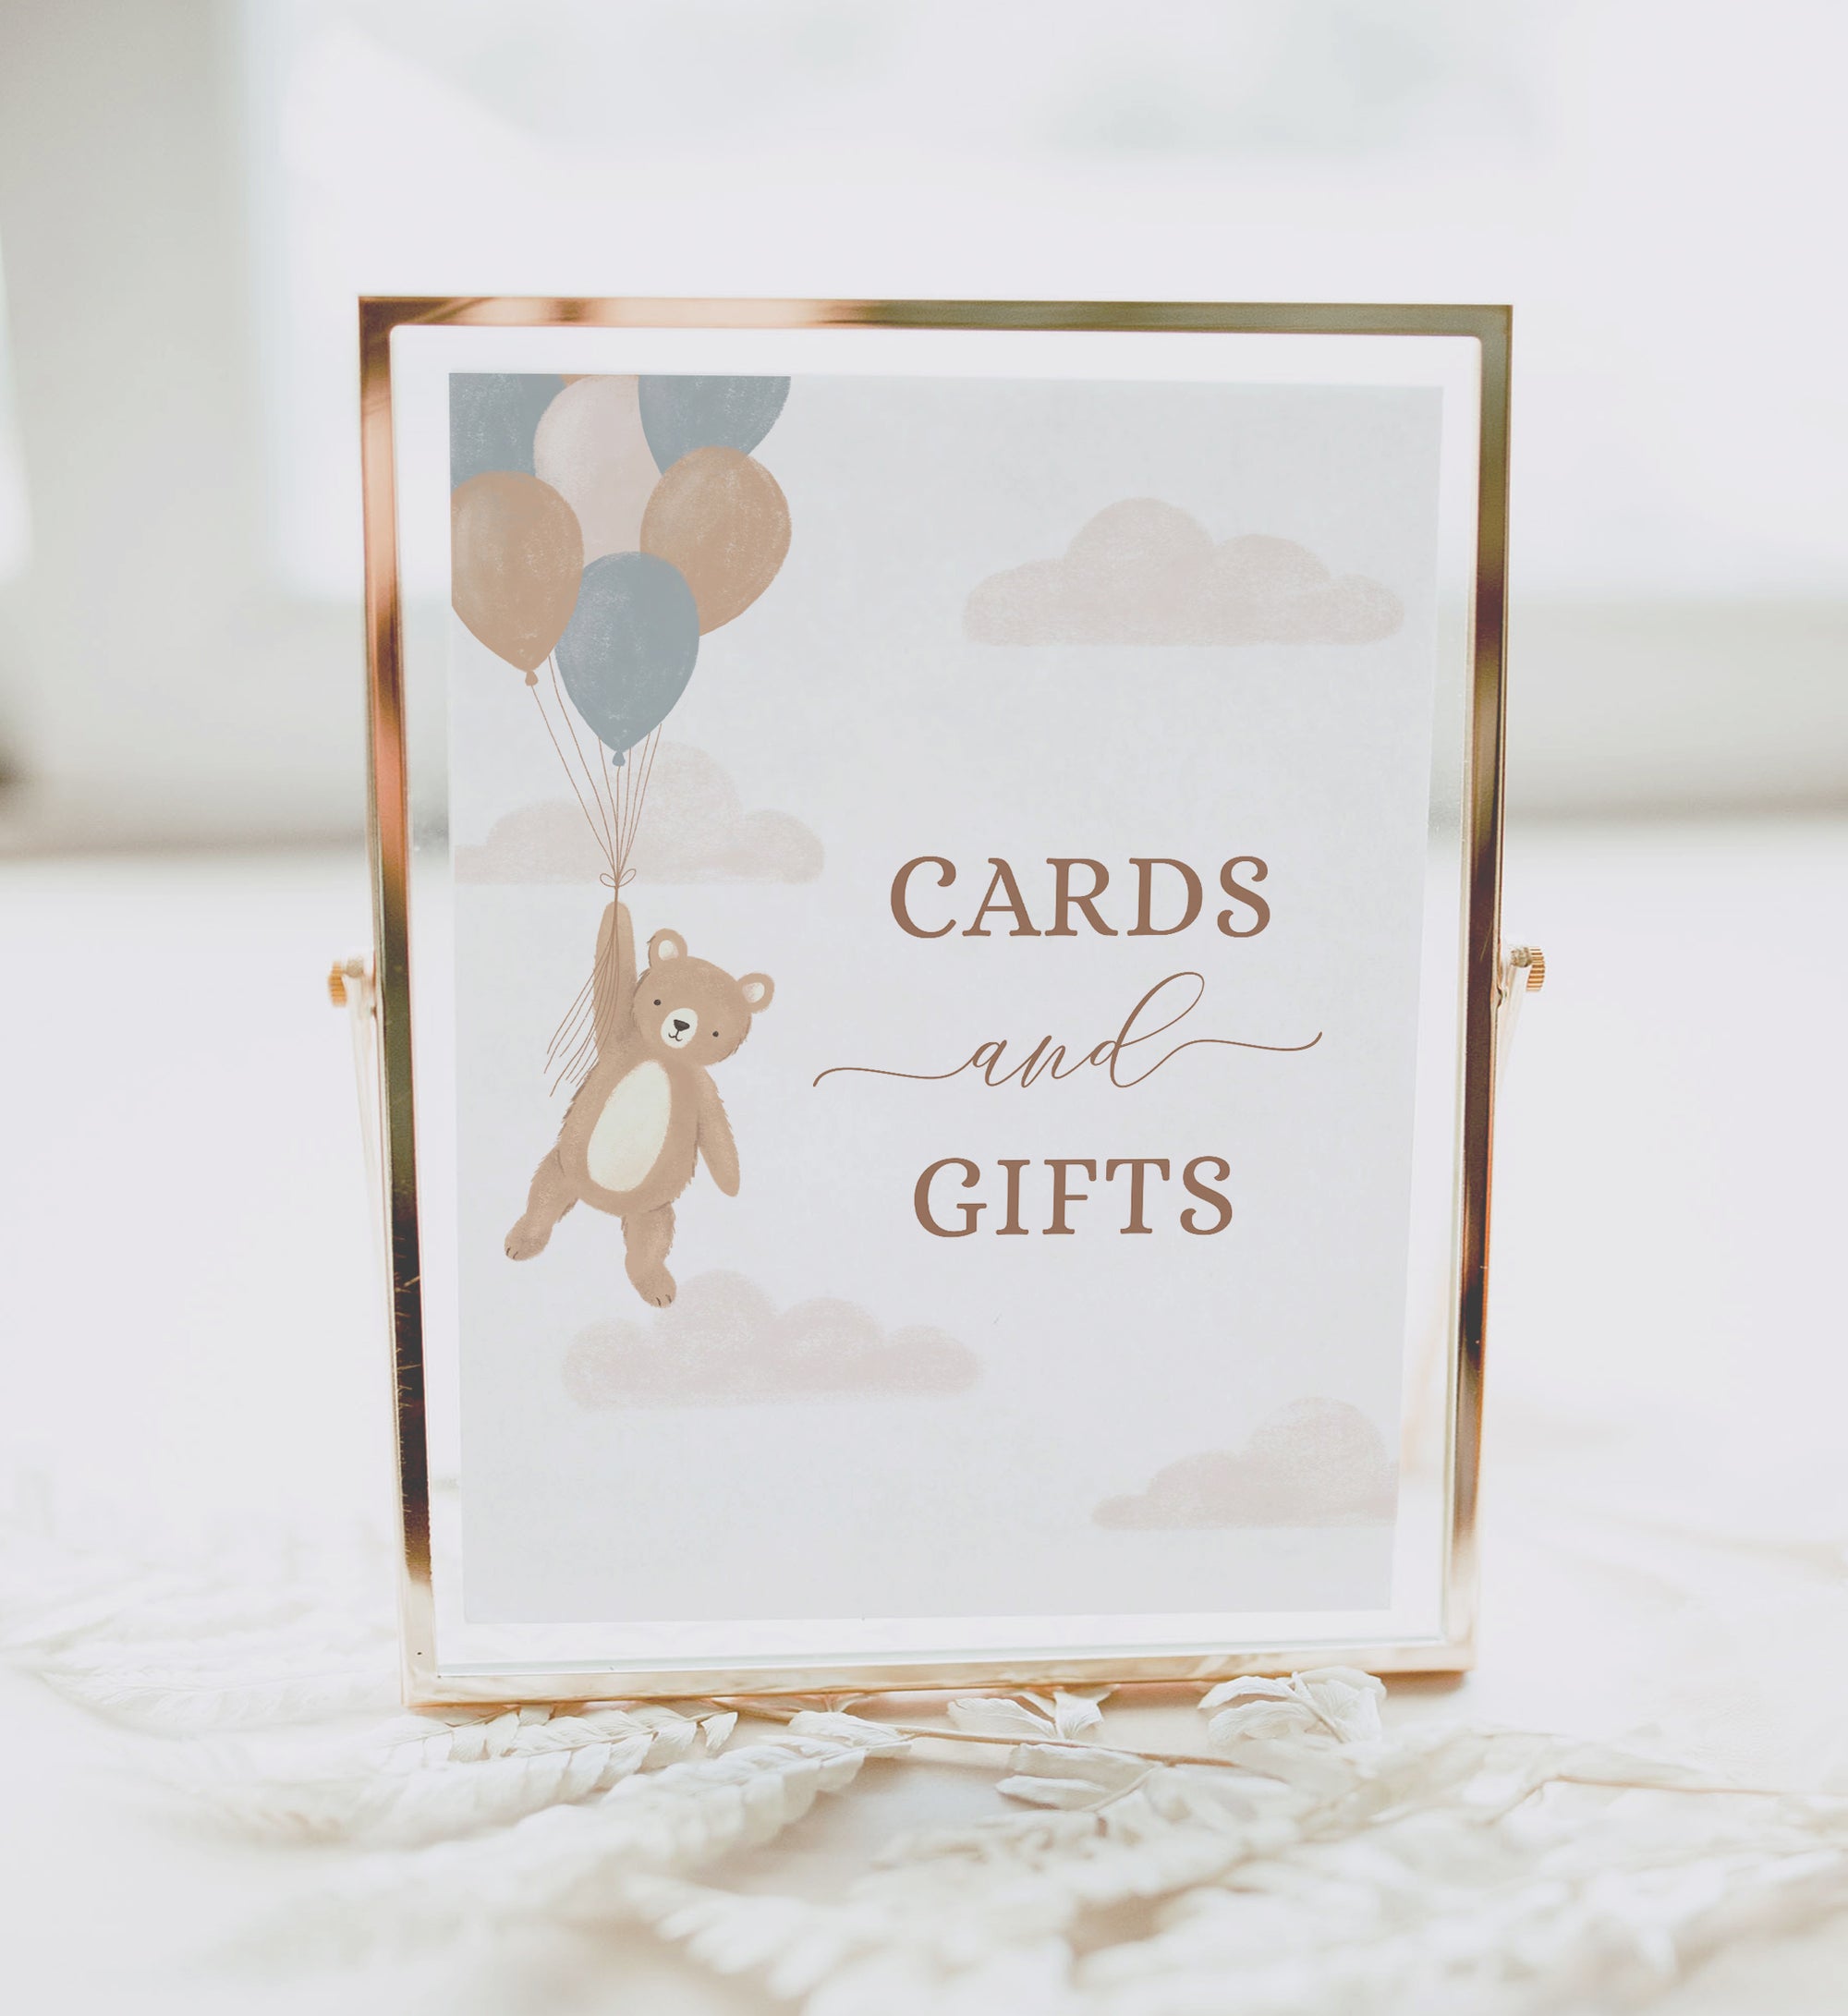 Teddy Bear Baby Shower Cards and Gifts Sign